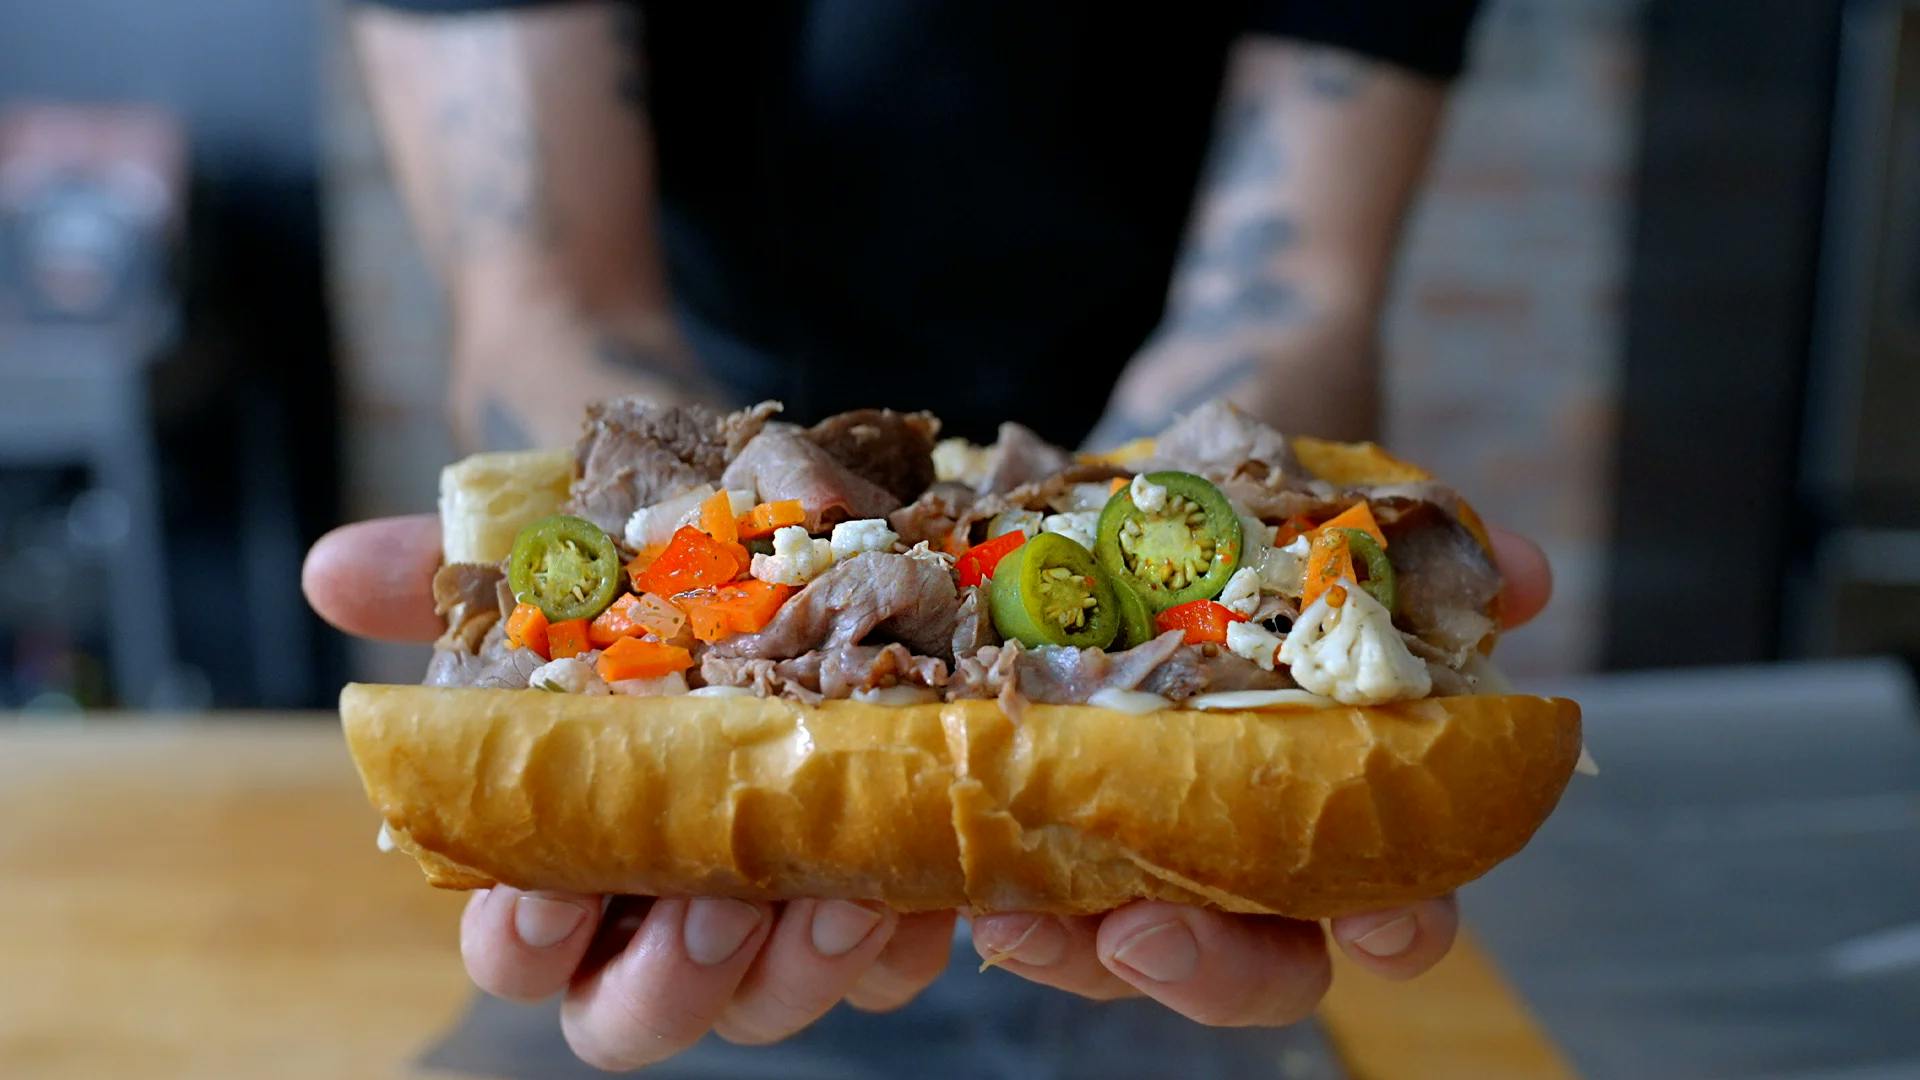 Chicago-Style Italian Beef inspired by The Bear